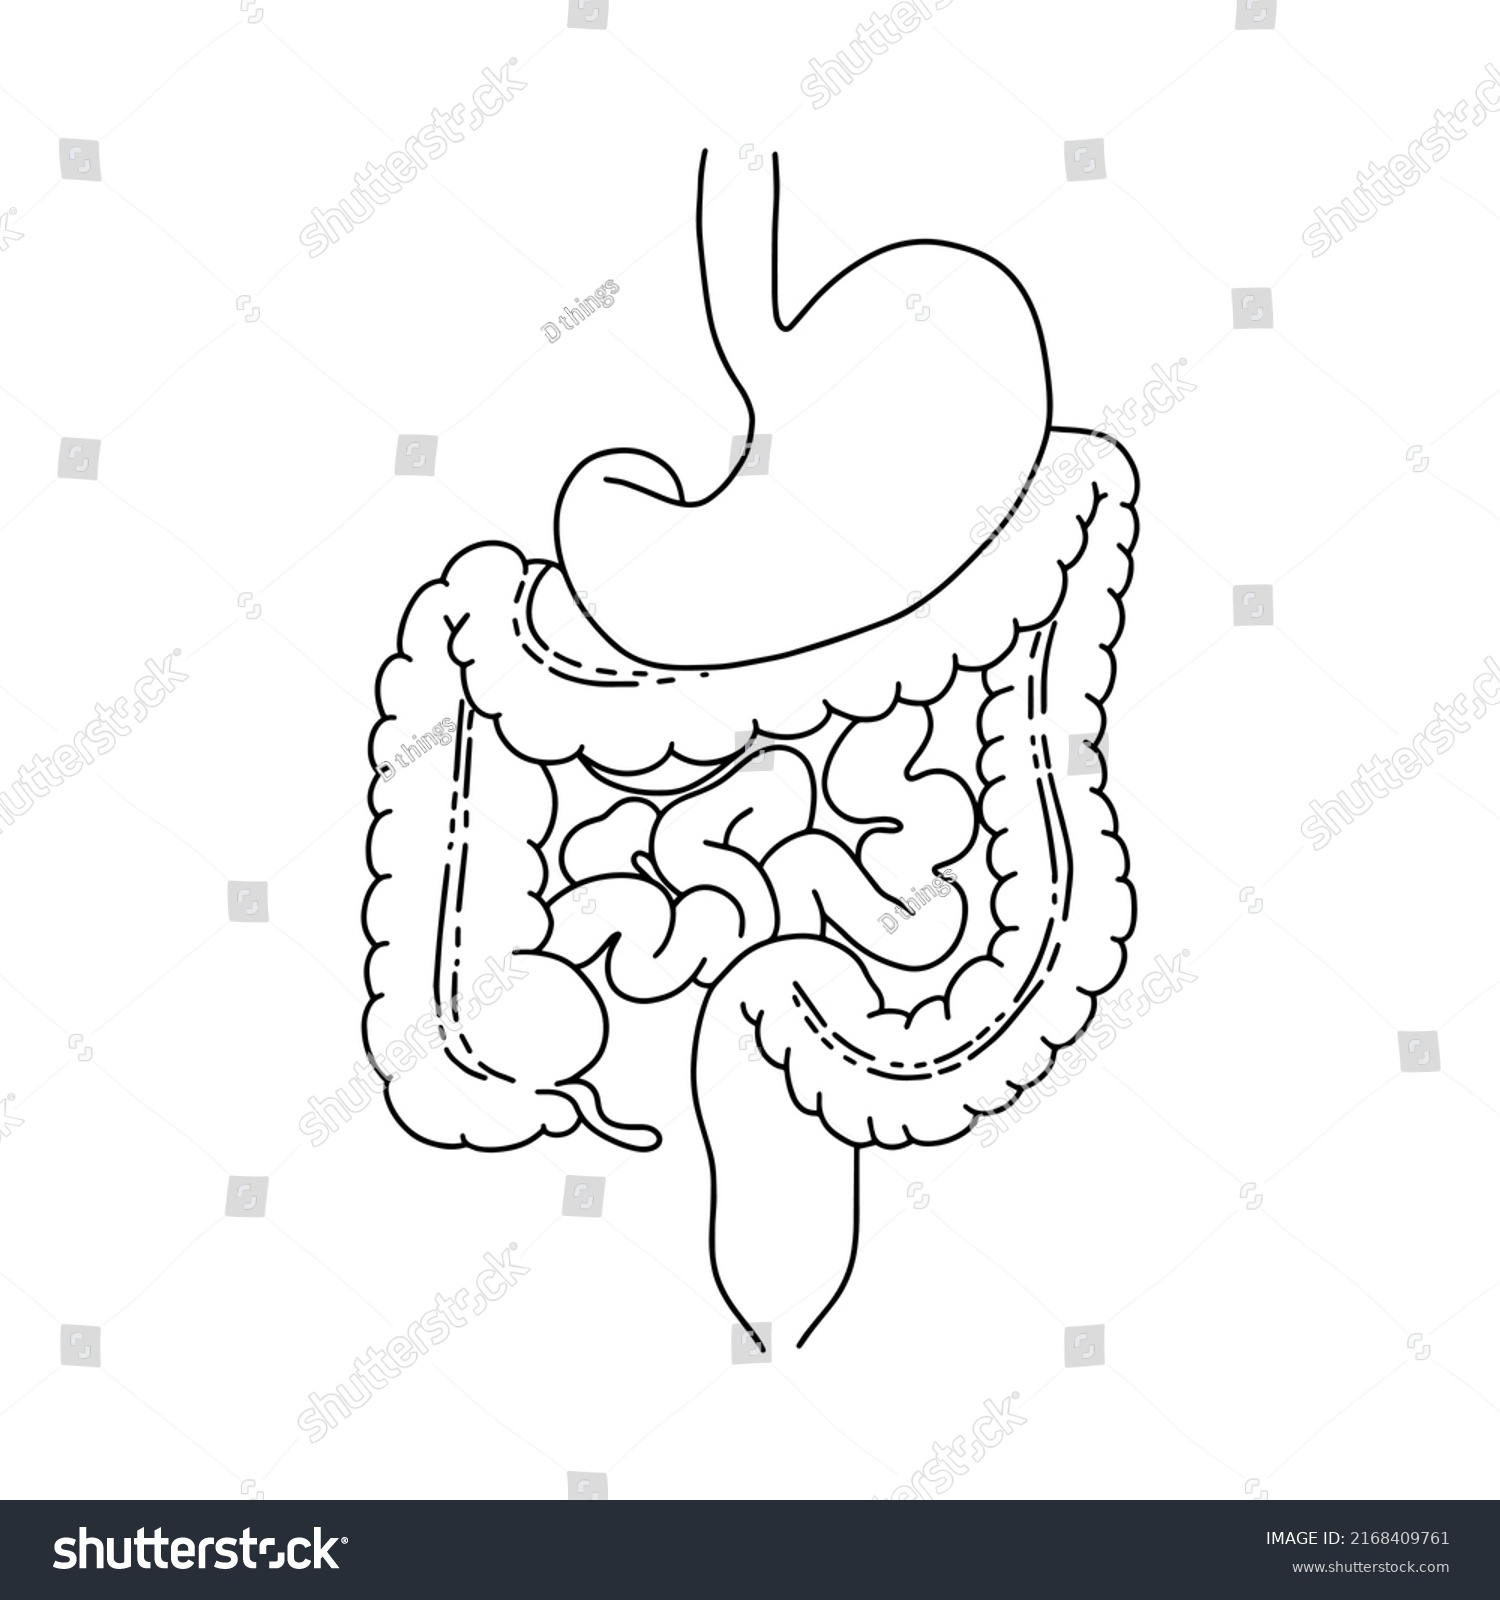 Components Human Intestine Human Digestive System Stock Vector (Royalty ...